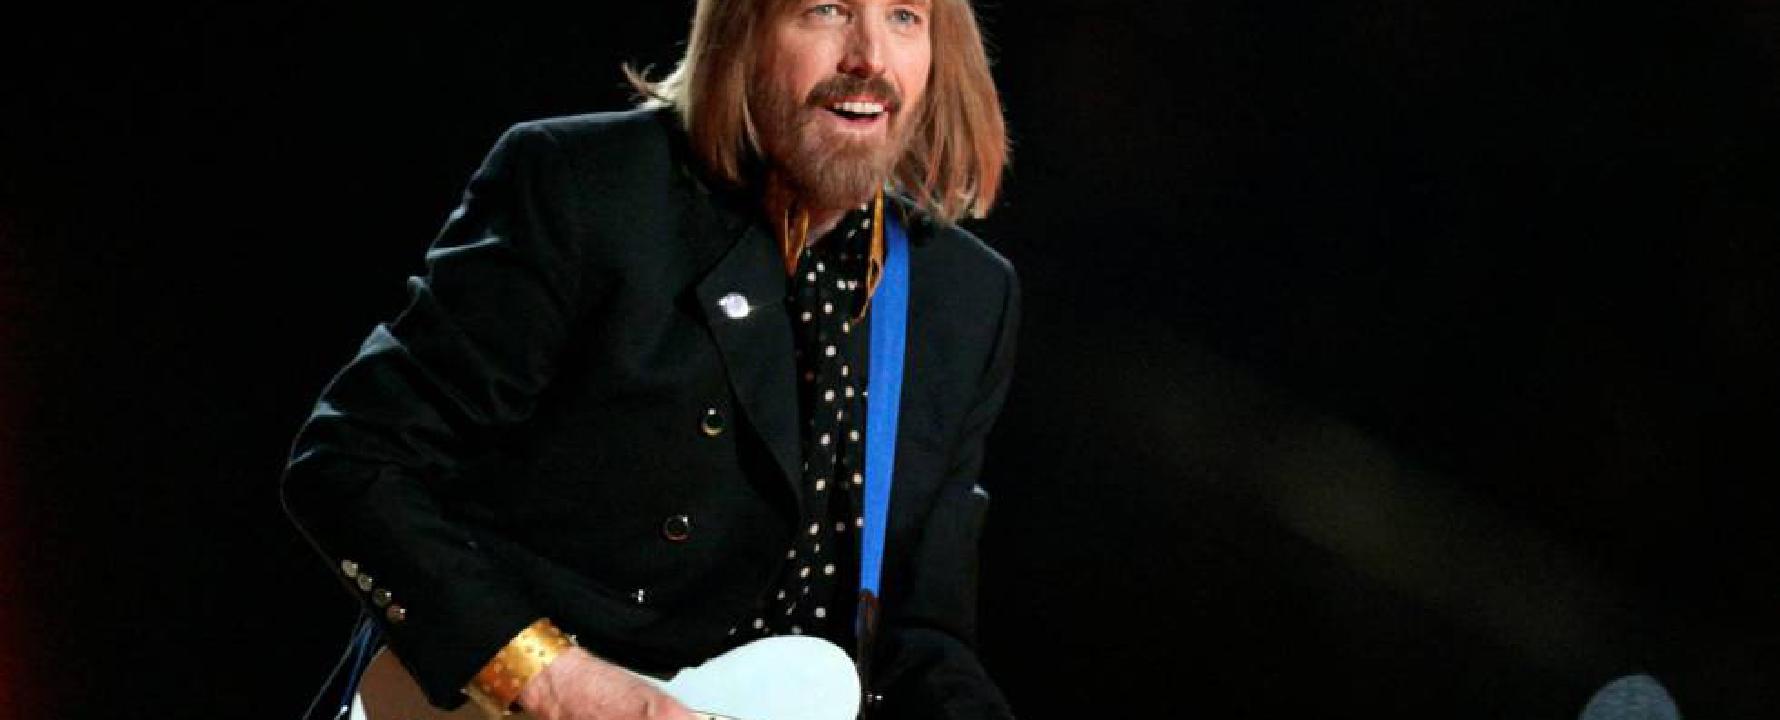 Promotional photograph of Tom Petty.